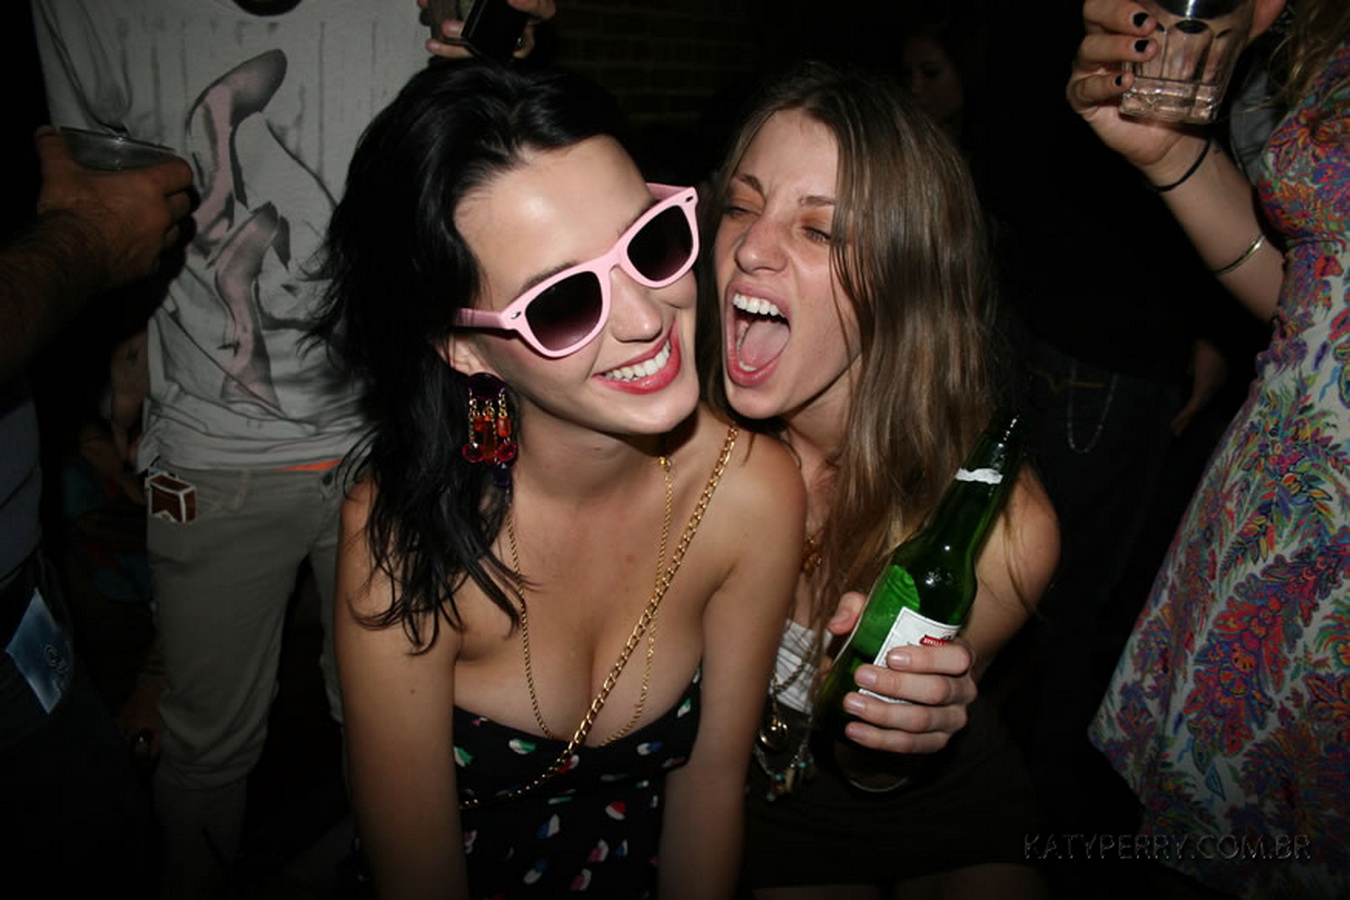 Katy_Perry_bobsslip_drunk_cleavage_downblouse_upskirt_nipslip_at_her_birthday_2007_party_99x_HQ_34.jpg